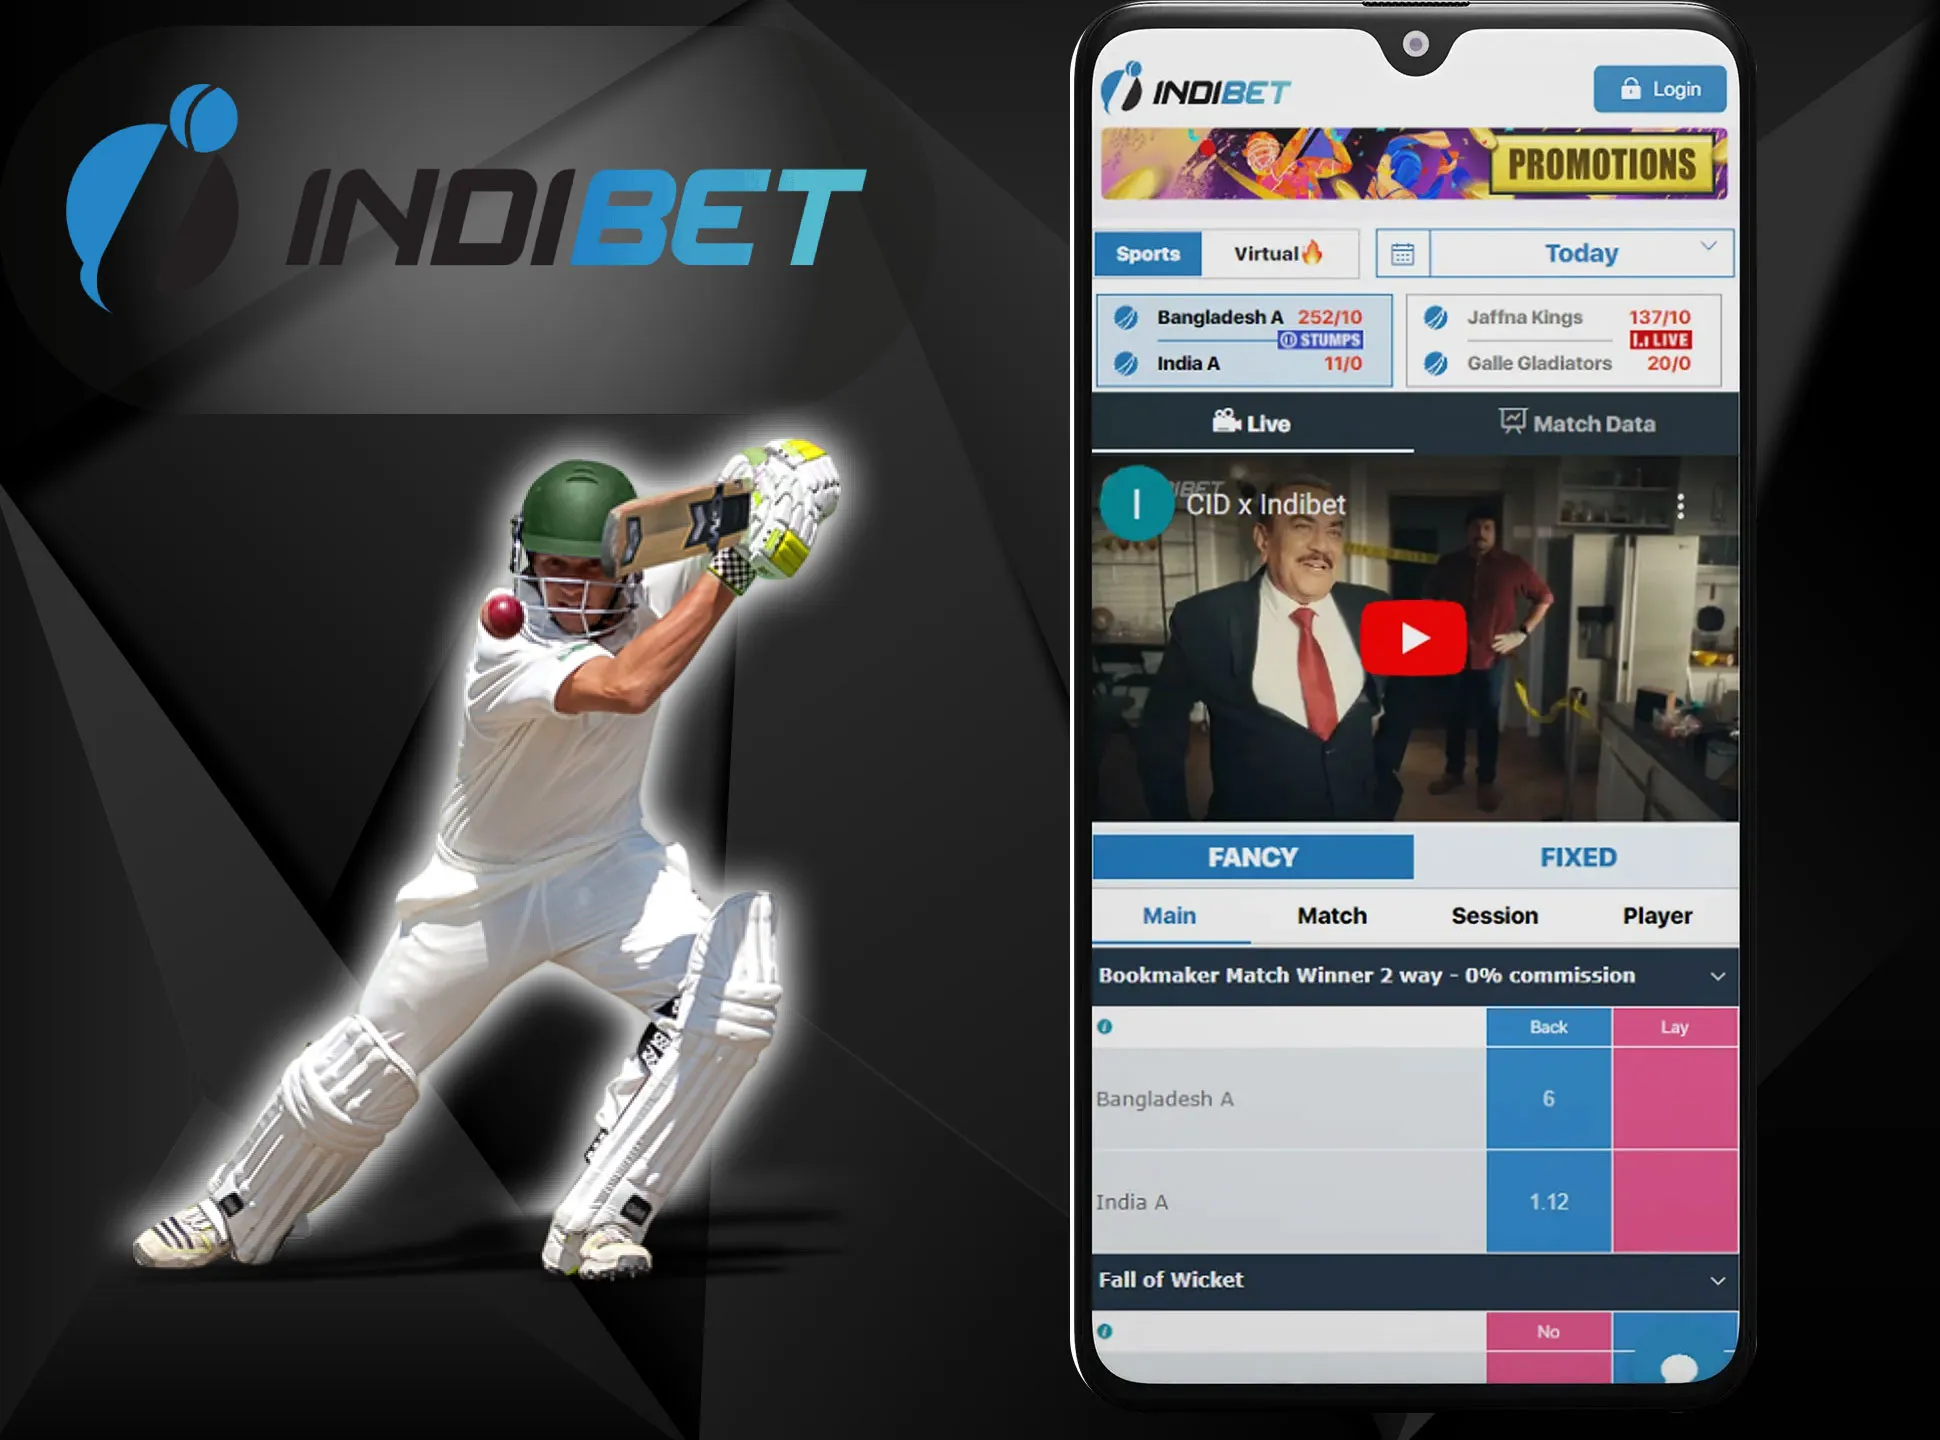 Indibet offers betting on real money in its mobile app.